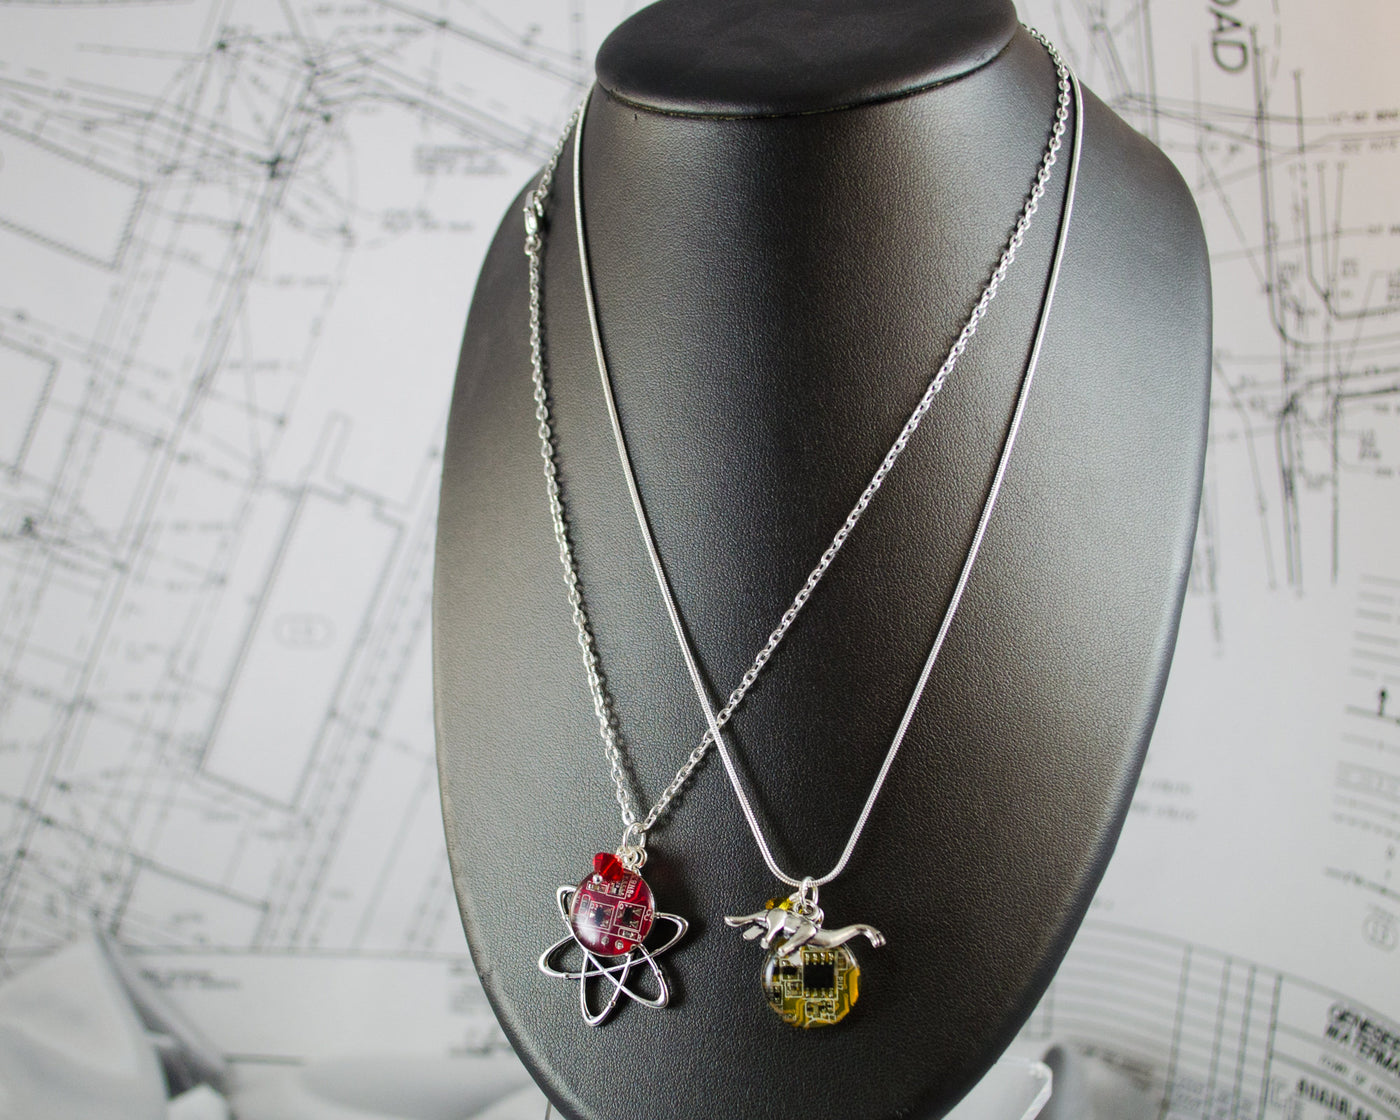 Robot and Circuit Board Charm Necklace